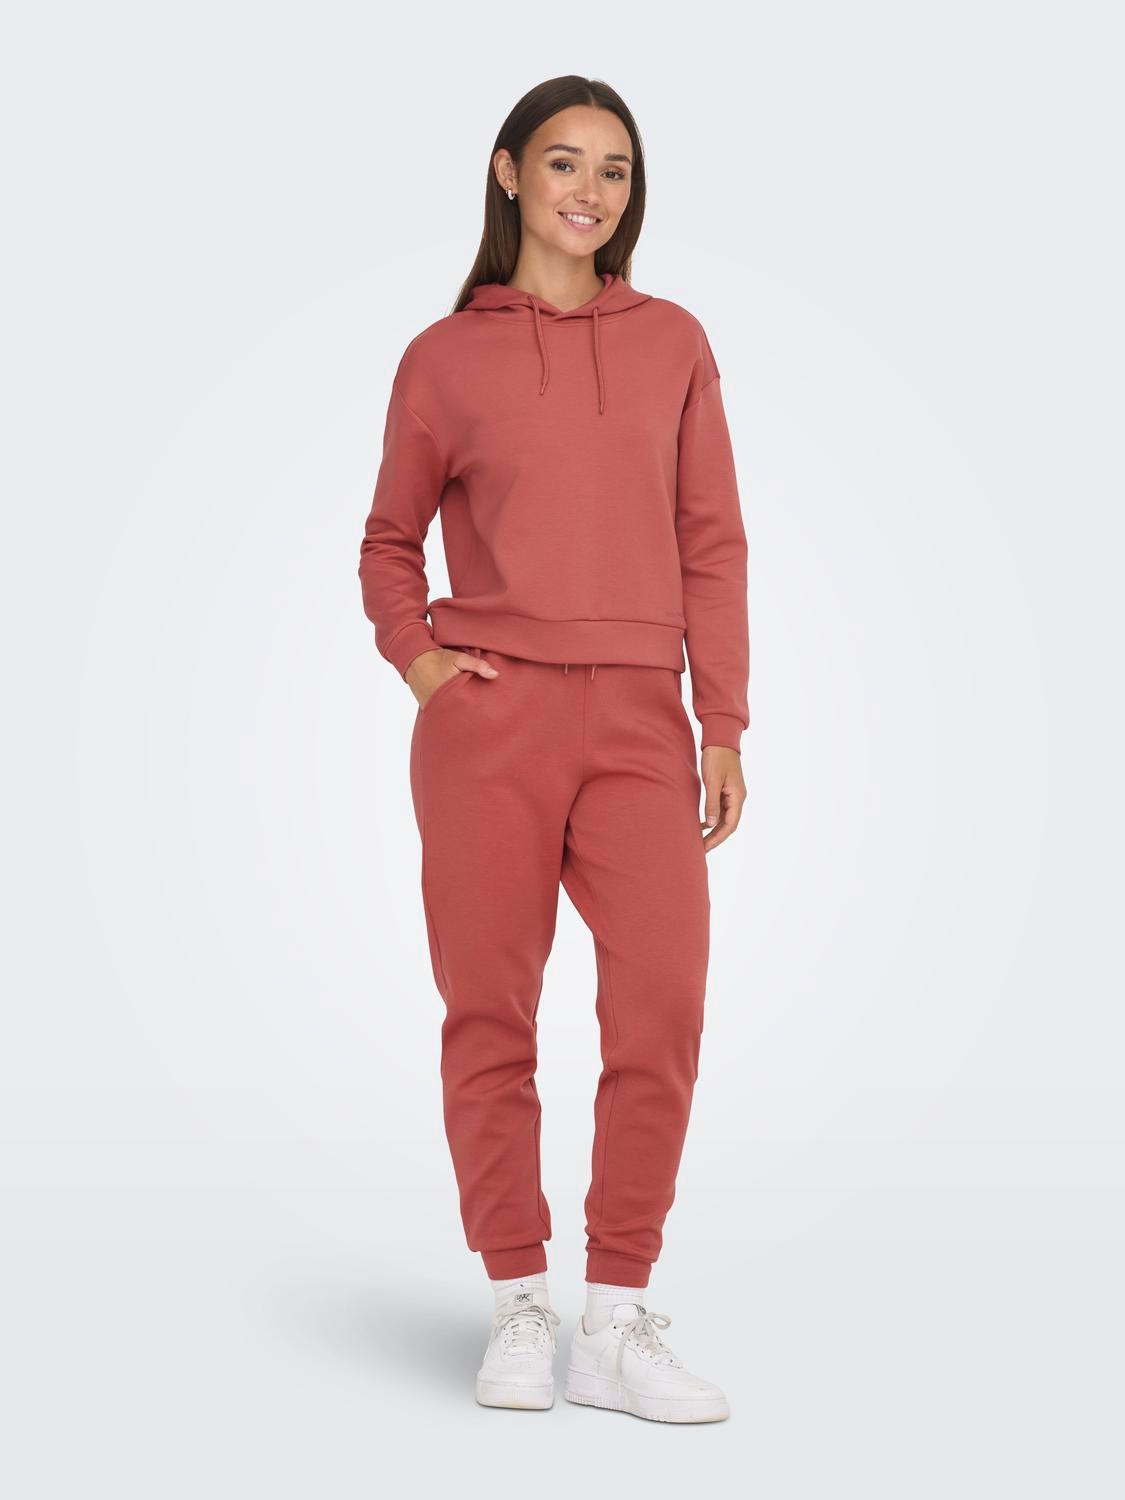 ONLY Taille haute Jogging en molleton -Mineral Red - 15230209